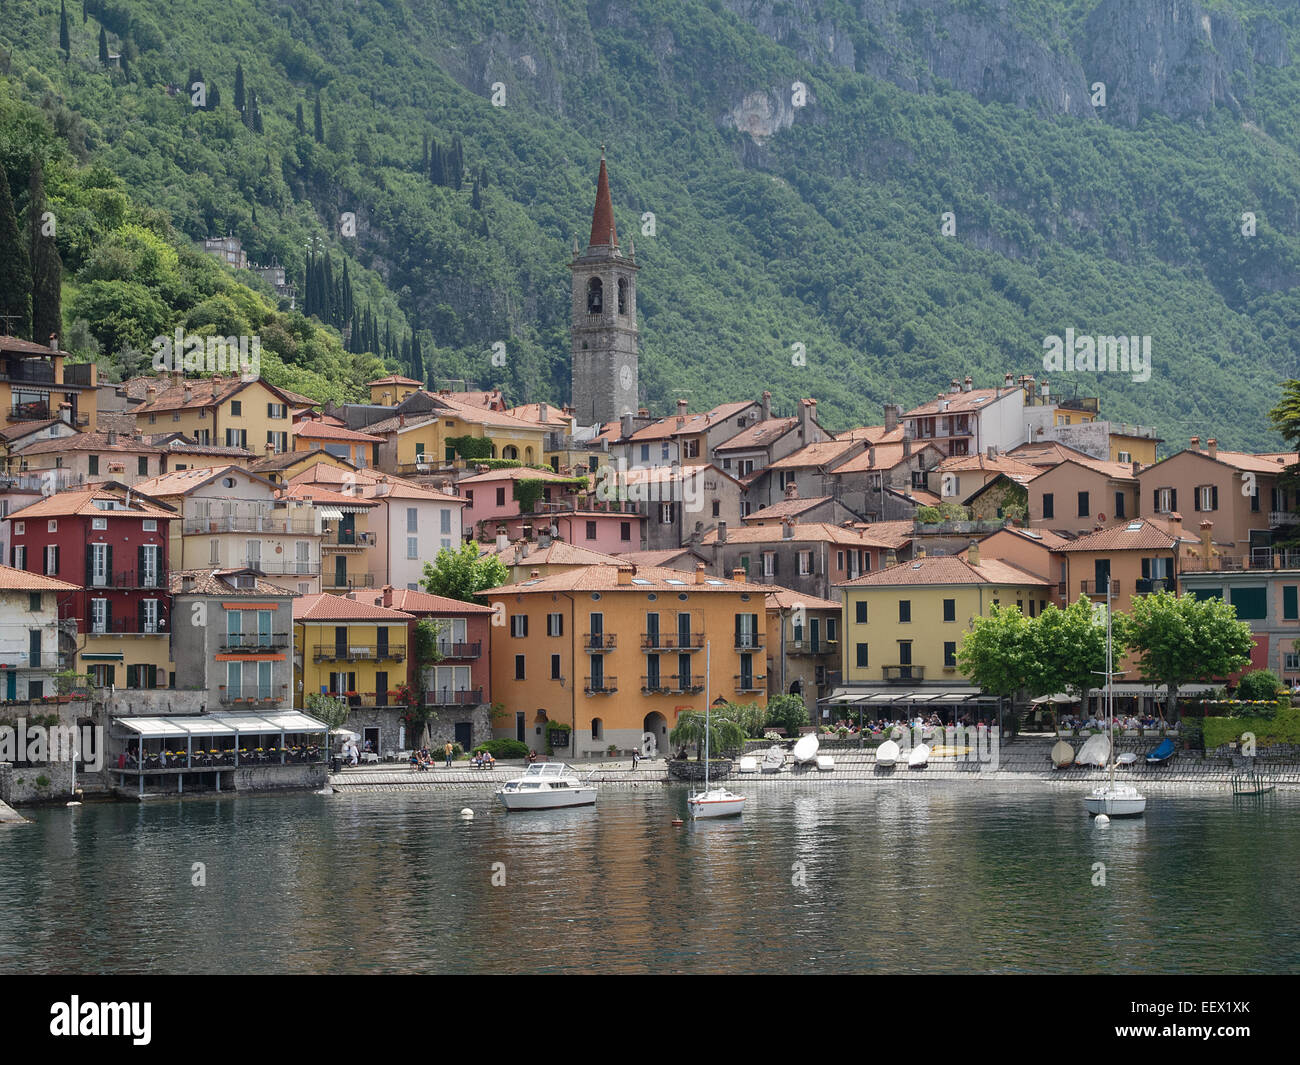 The colourful lakeside buildings and cafes of Varenna on Lake Como in Italy with tree covered mountain backdrop Stock Photo